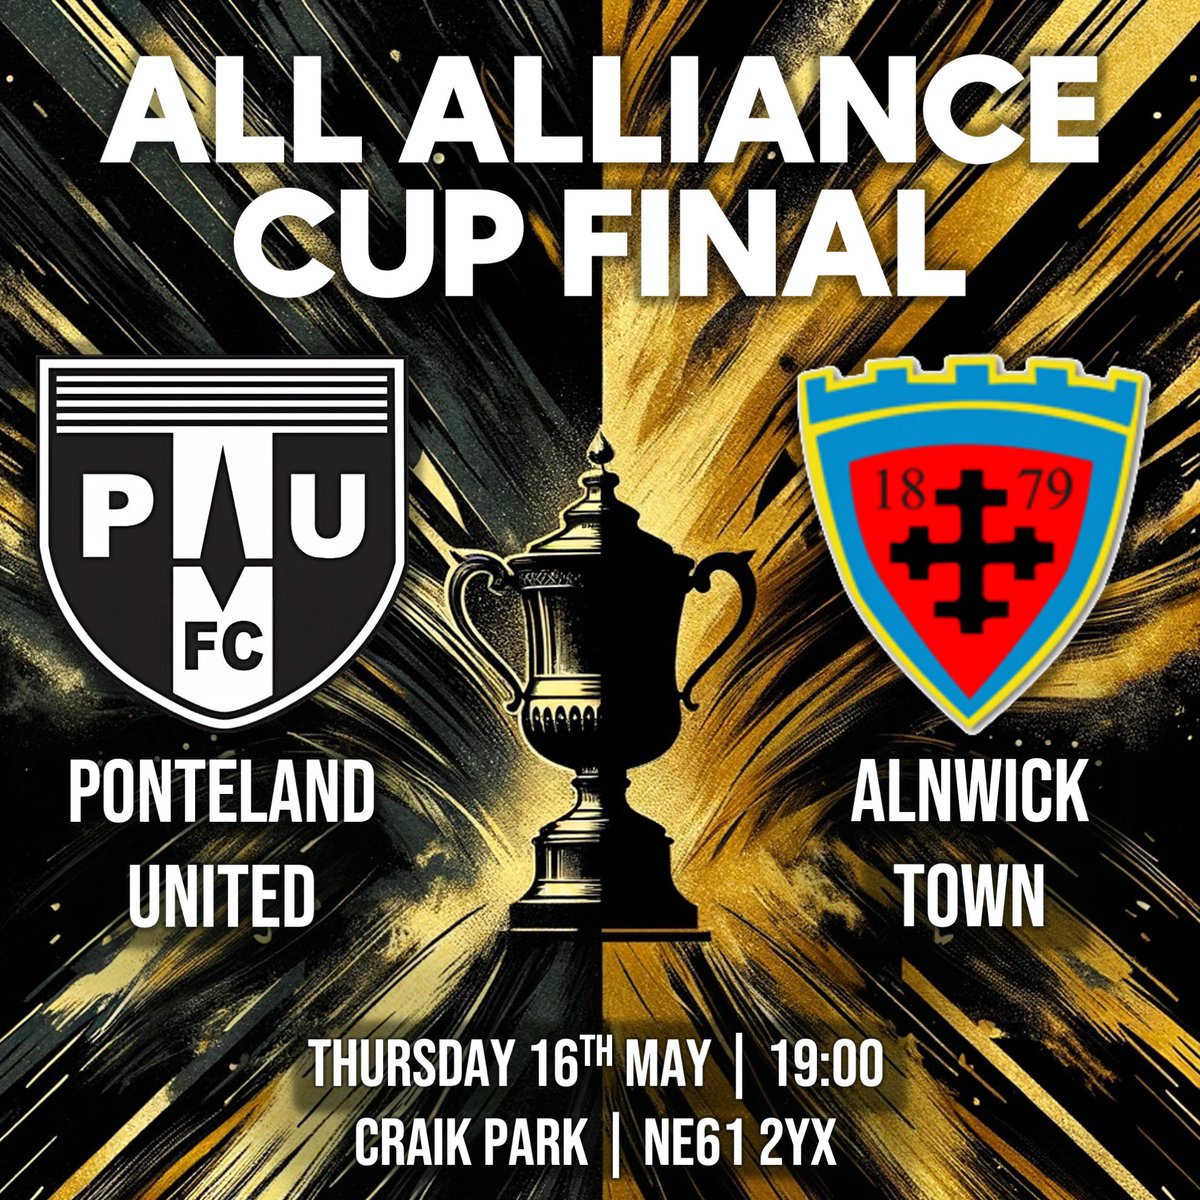 CUP FINAL WEEK! ⌛️🏆 People of Darras Hall/ Ponteland your local football team needs YOU! 🫵🏼 Ticket Prices: Adult - £4 Concessions - £2 U16 - Free (Must be accompained by an adult) Cash Only - Payment by card not available Any support is much appreciated! 🖤🤍